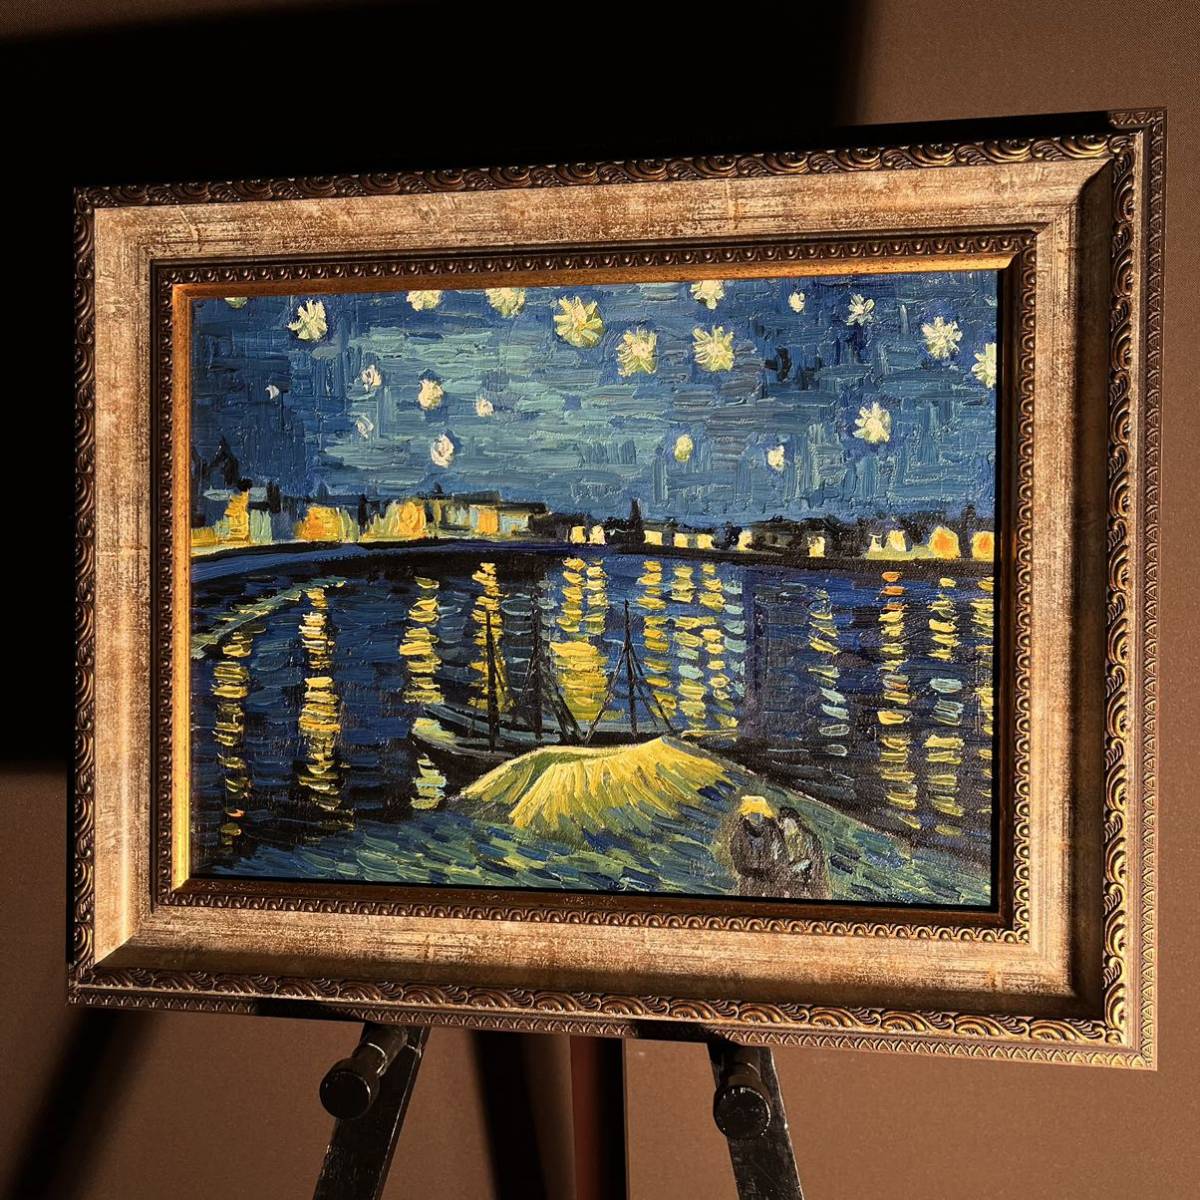  handwriting . oil painting go ho low n river. star month night amount attaching picture interior oil painting .